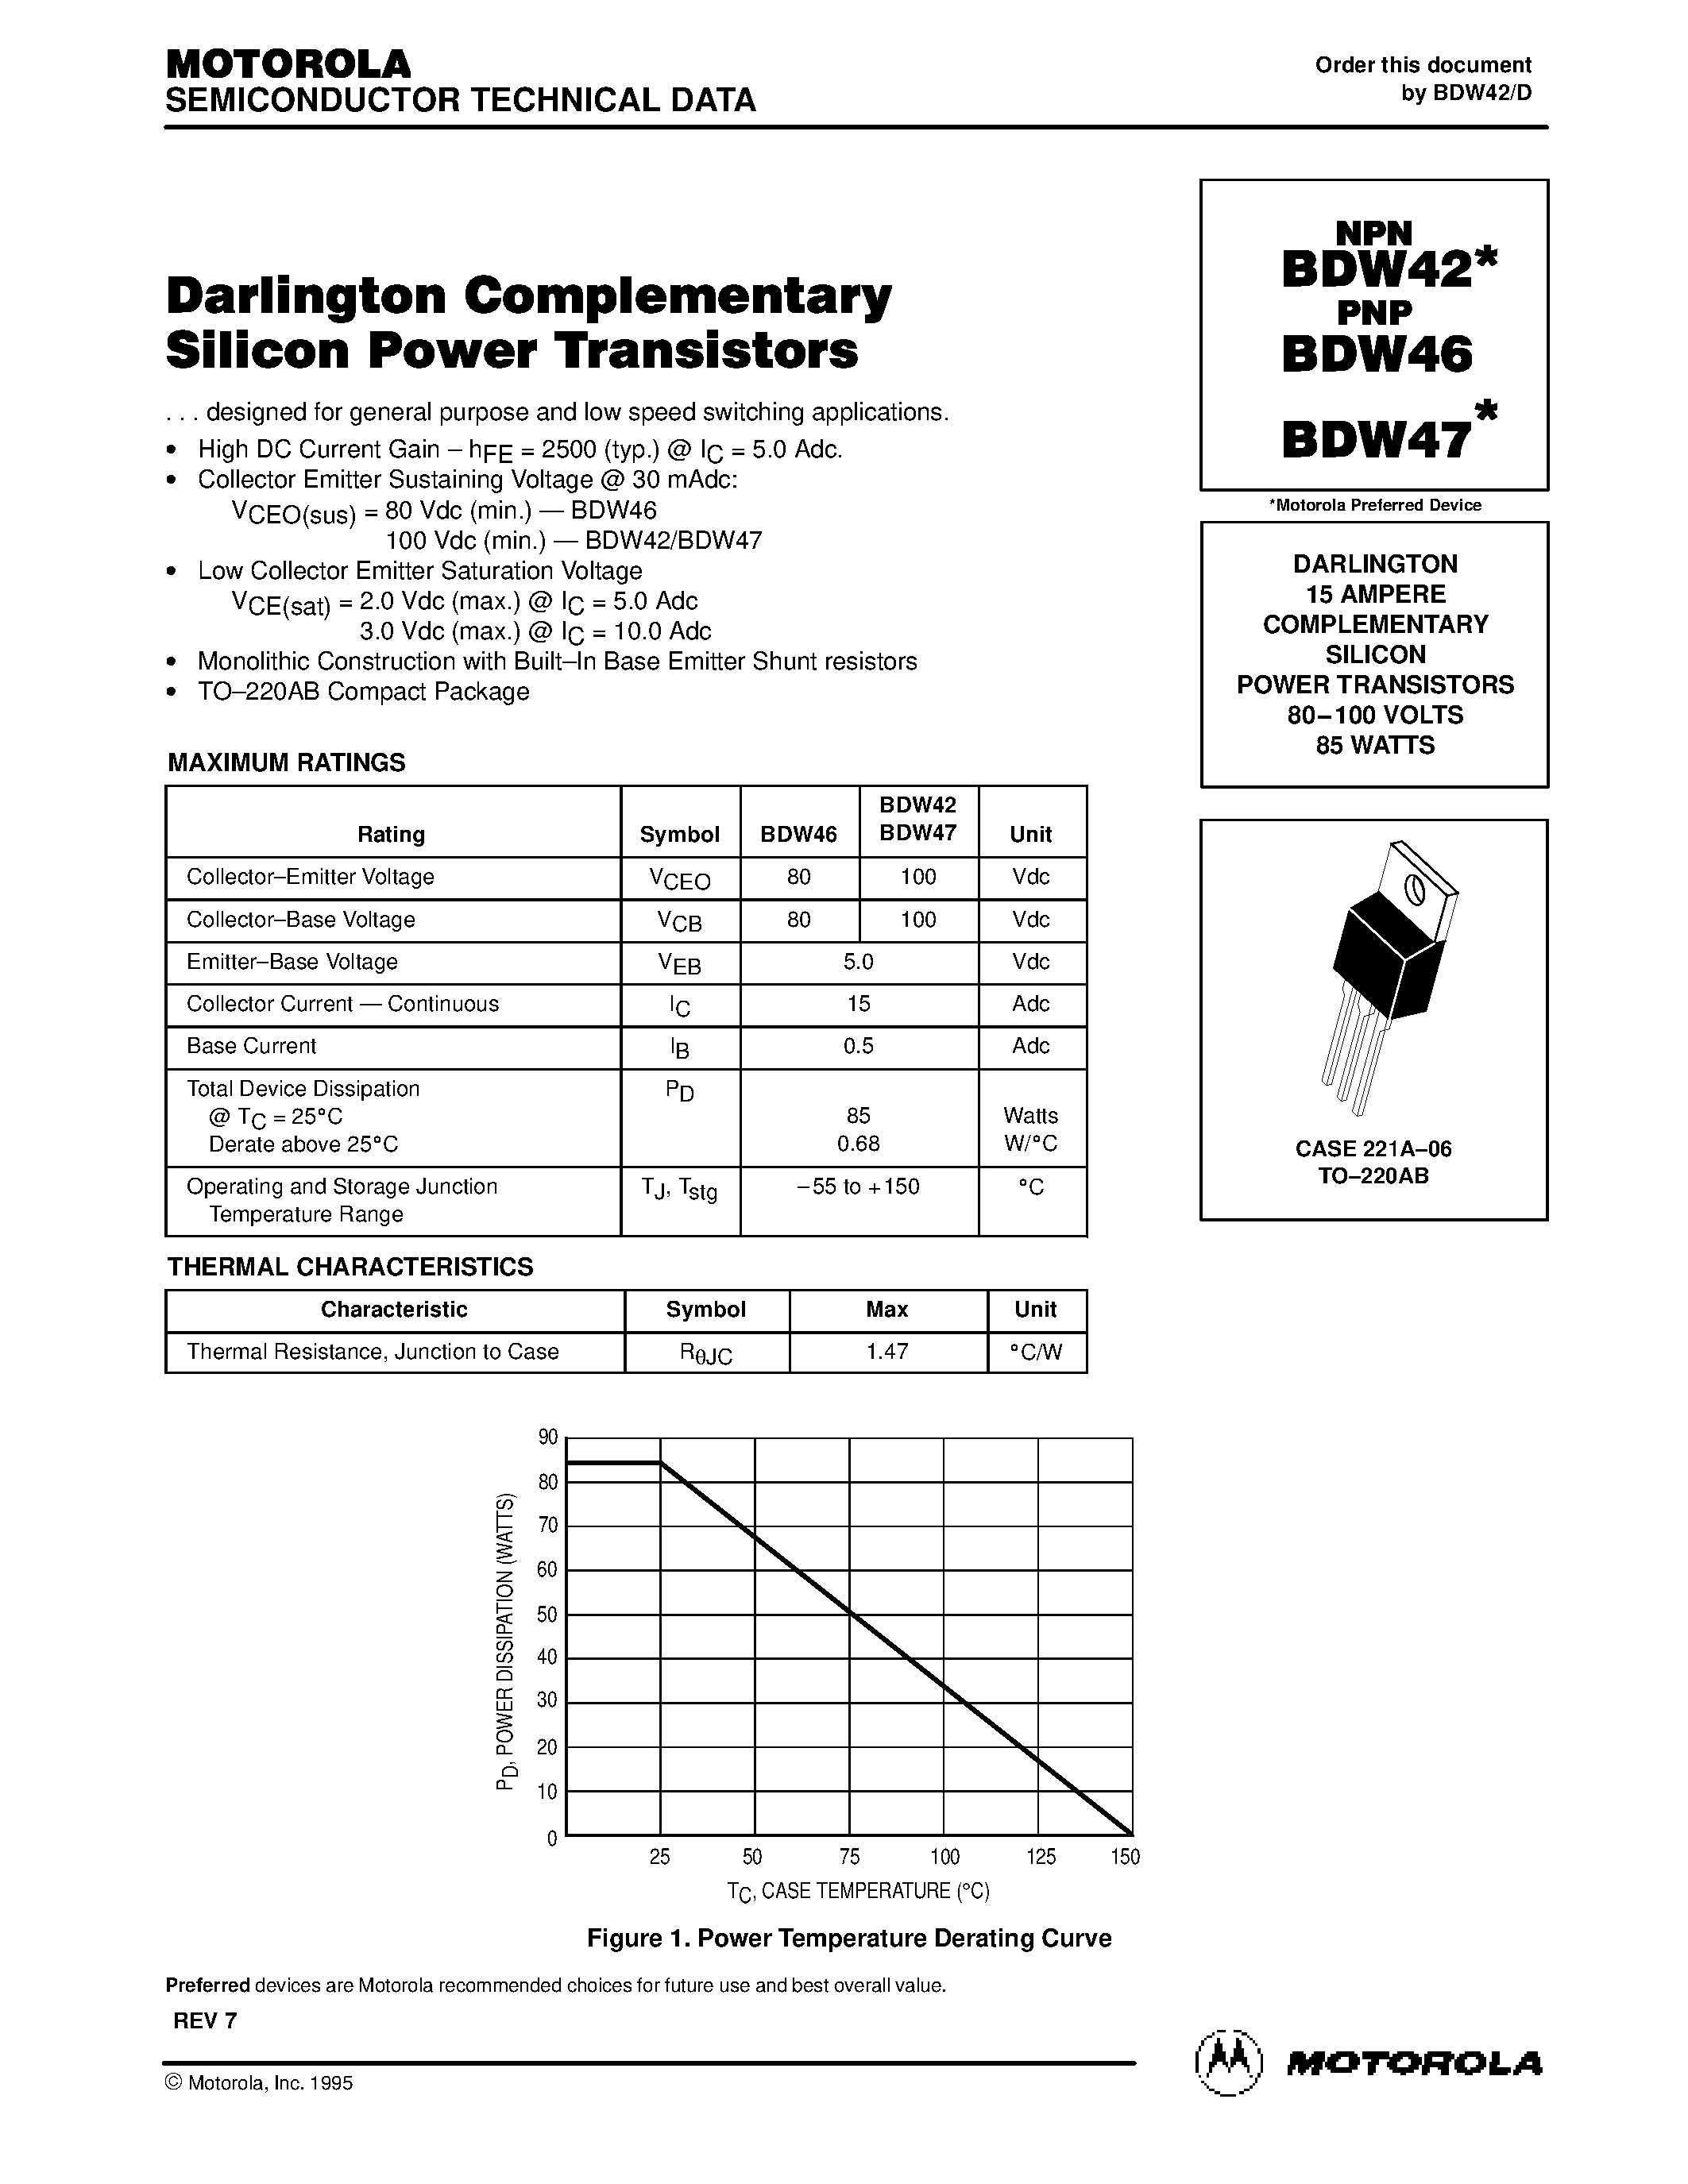 Datasheet BDW42 - Darlington Complementary Silicon Power Transistors page 1